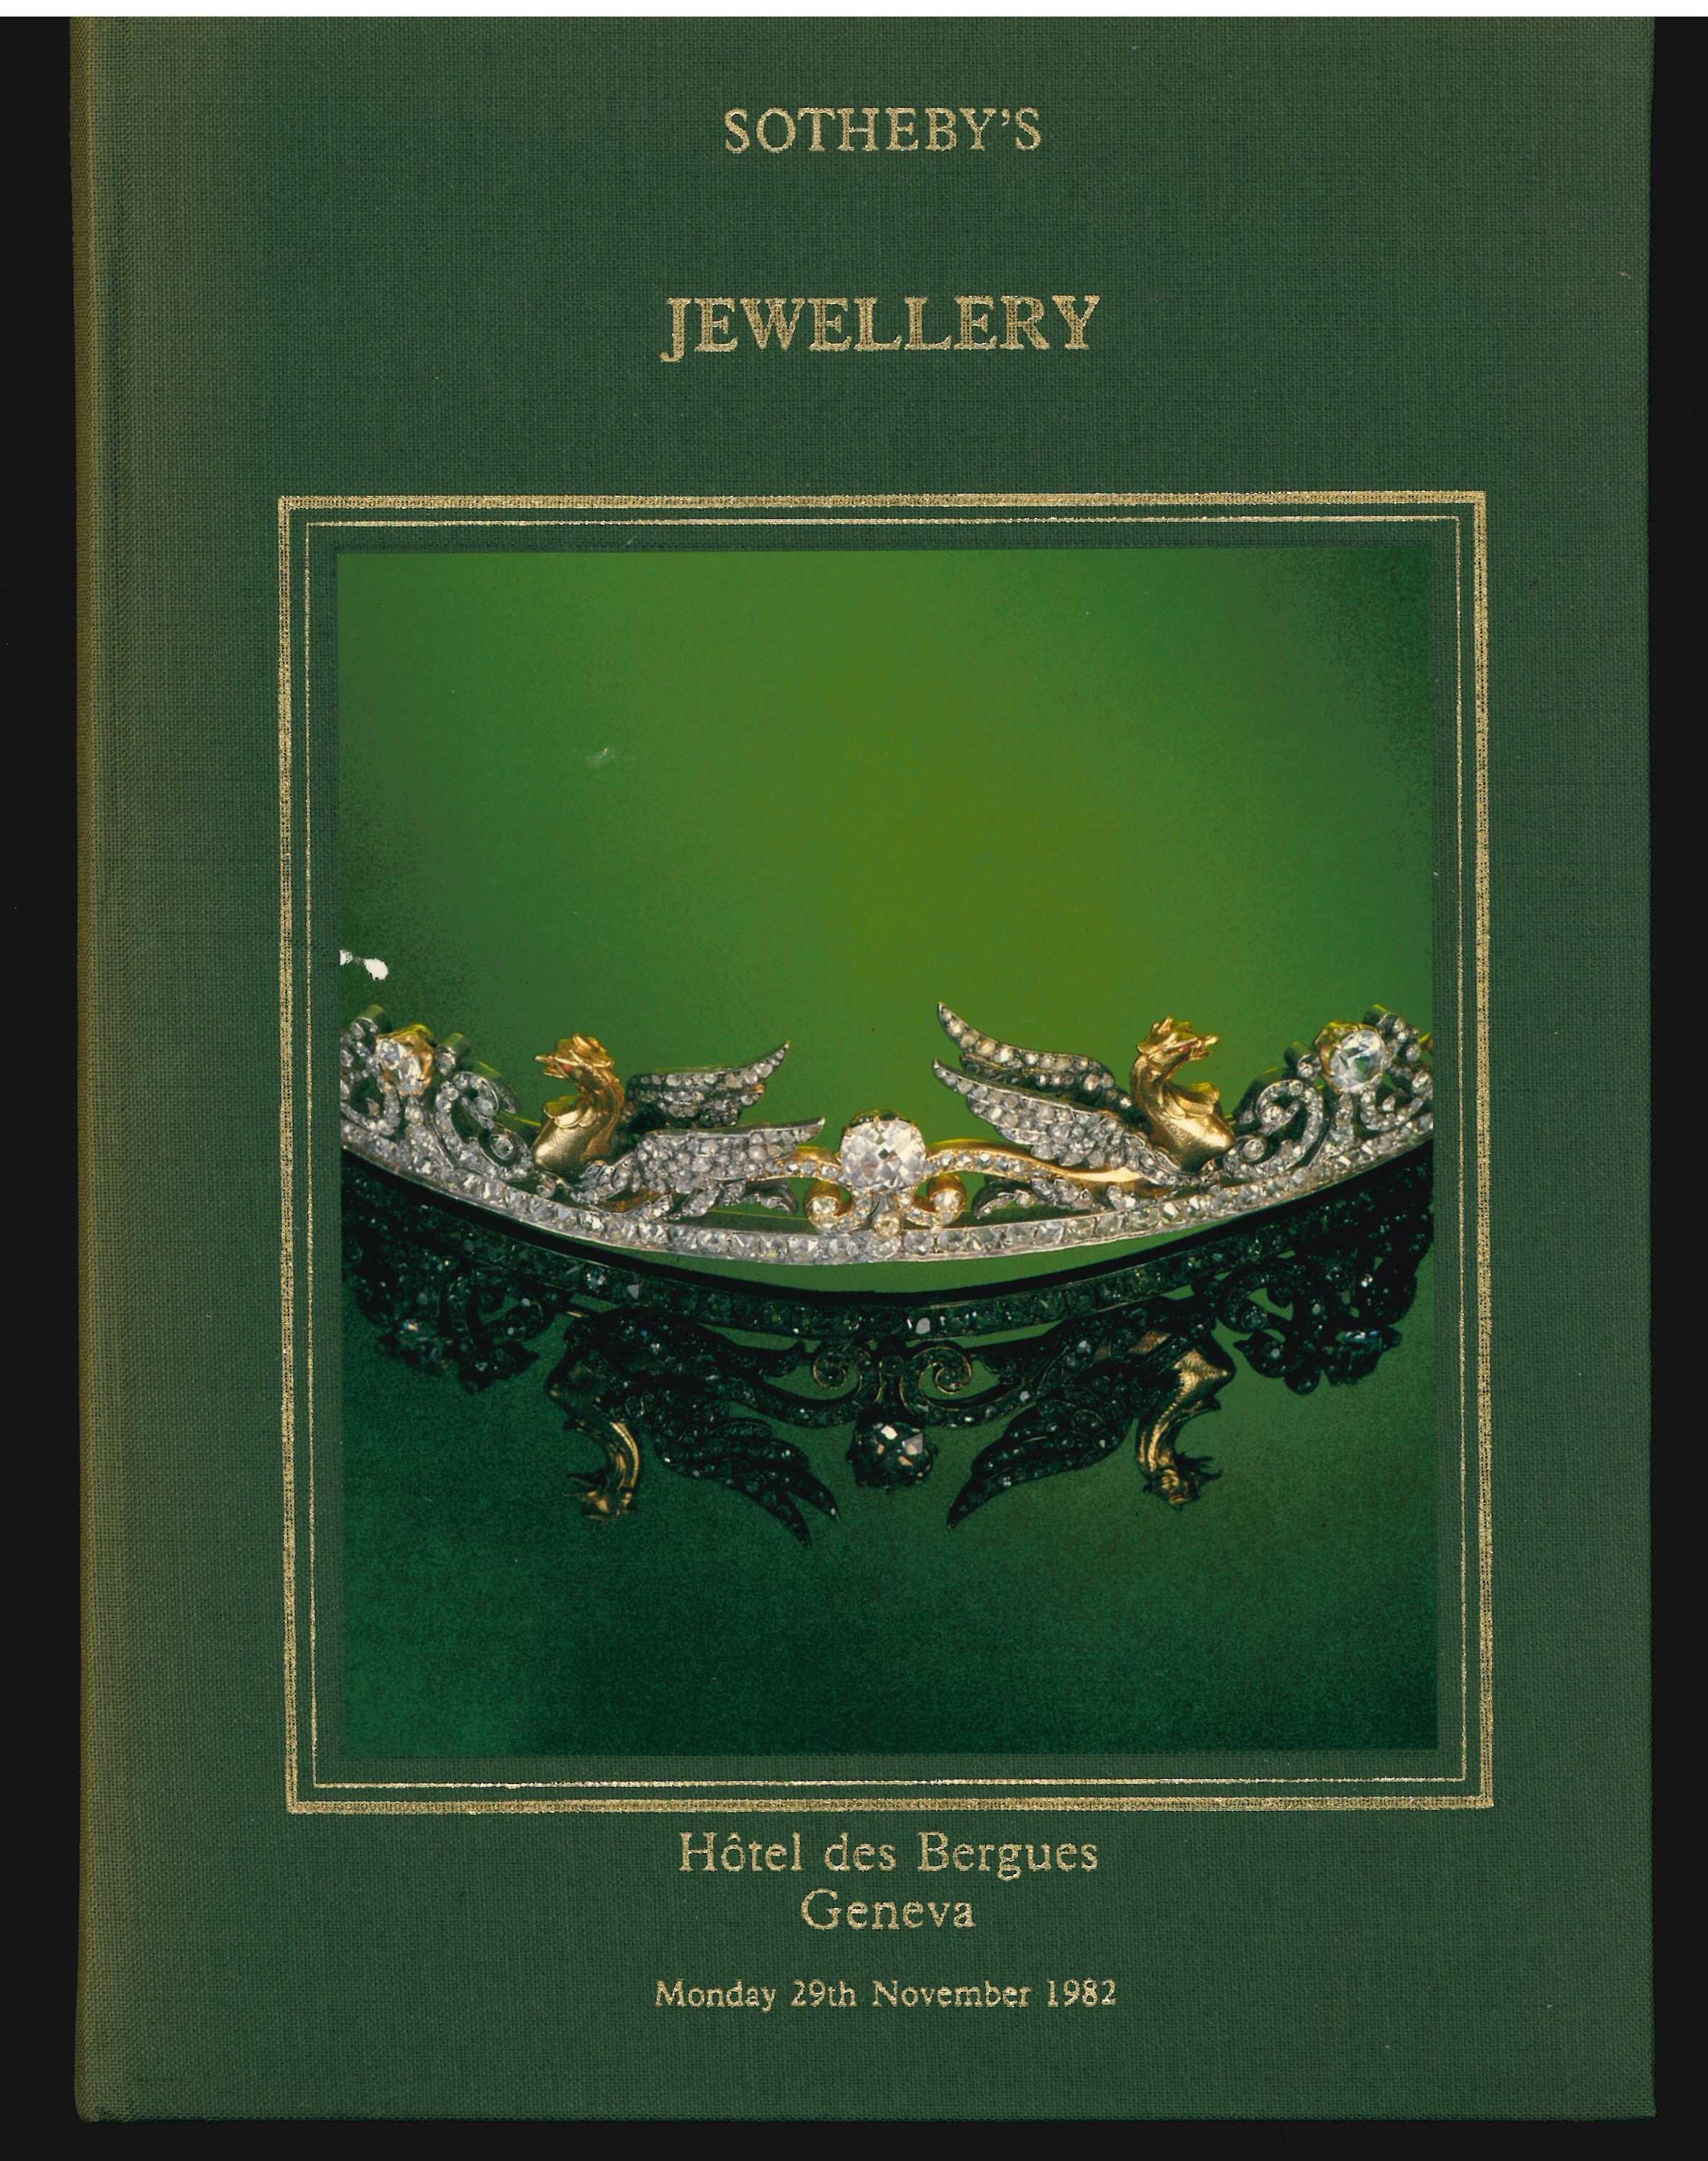 These six catalogues are from Sotheby's Jewellery sales which took place in the 1980's. Five were held in Geneva and the sixth was in St. Moritz.
1 - November 1982 Geneva with 705 lots and which includes The property of HRH, The Crown Prince of